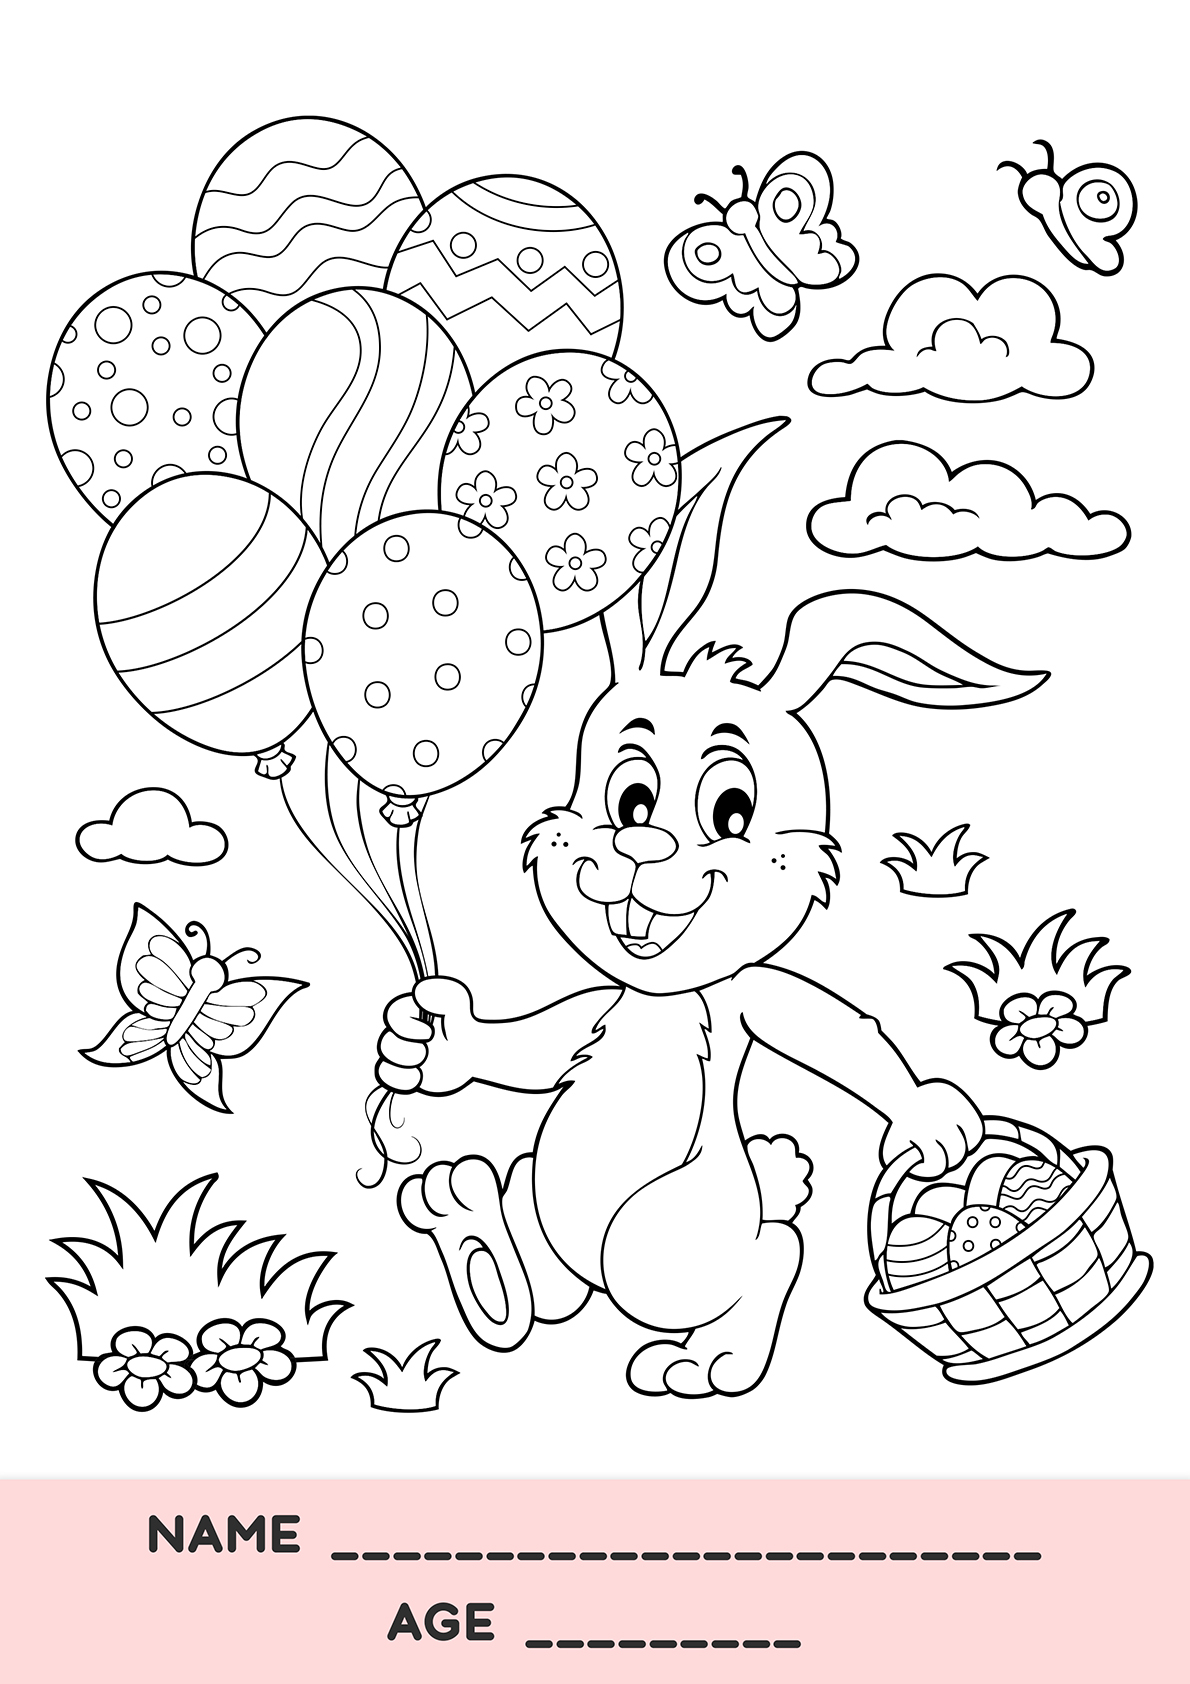 FREE Easter Colouring In for the Kids - Star 101.9 Mackay